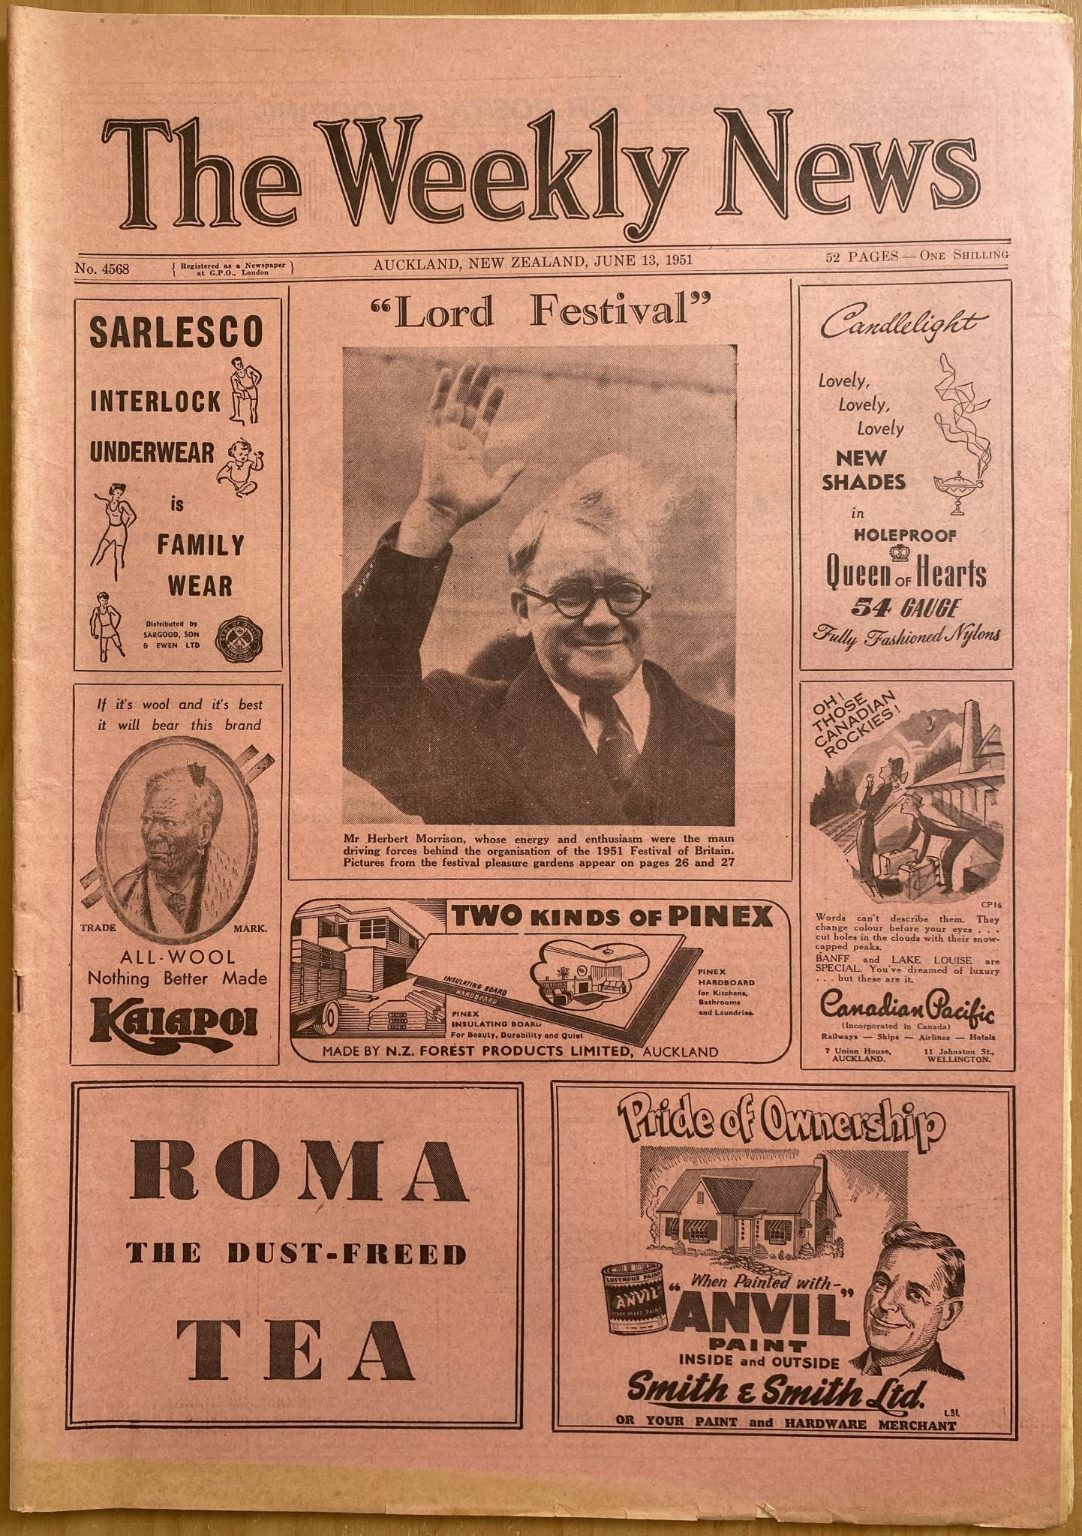 OLD NEWSPAPER: The Weekly News, No. 4568, 13 June 1951